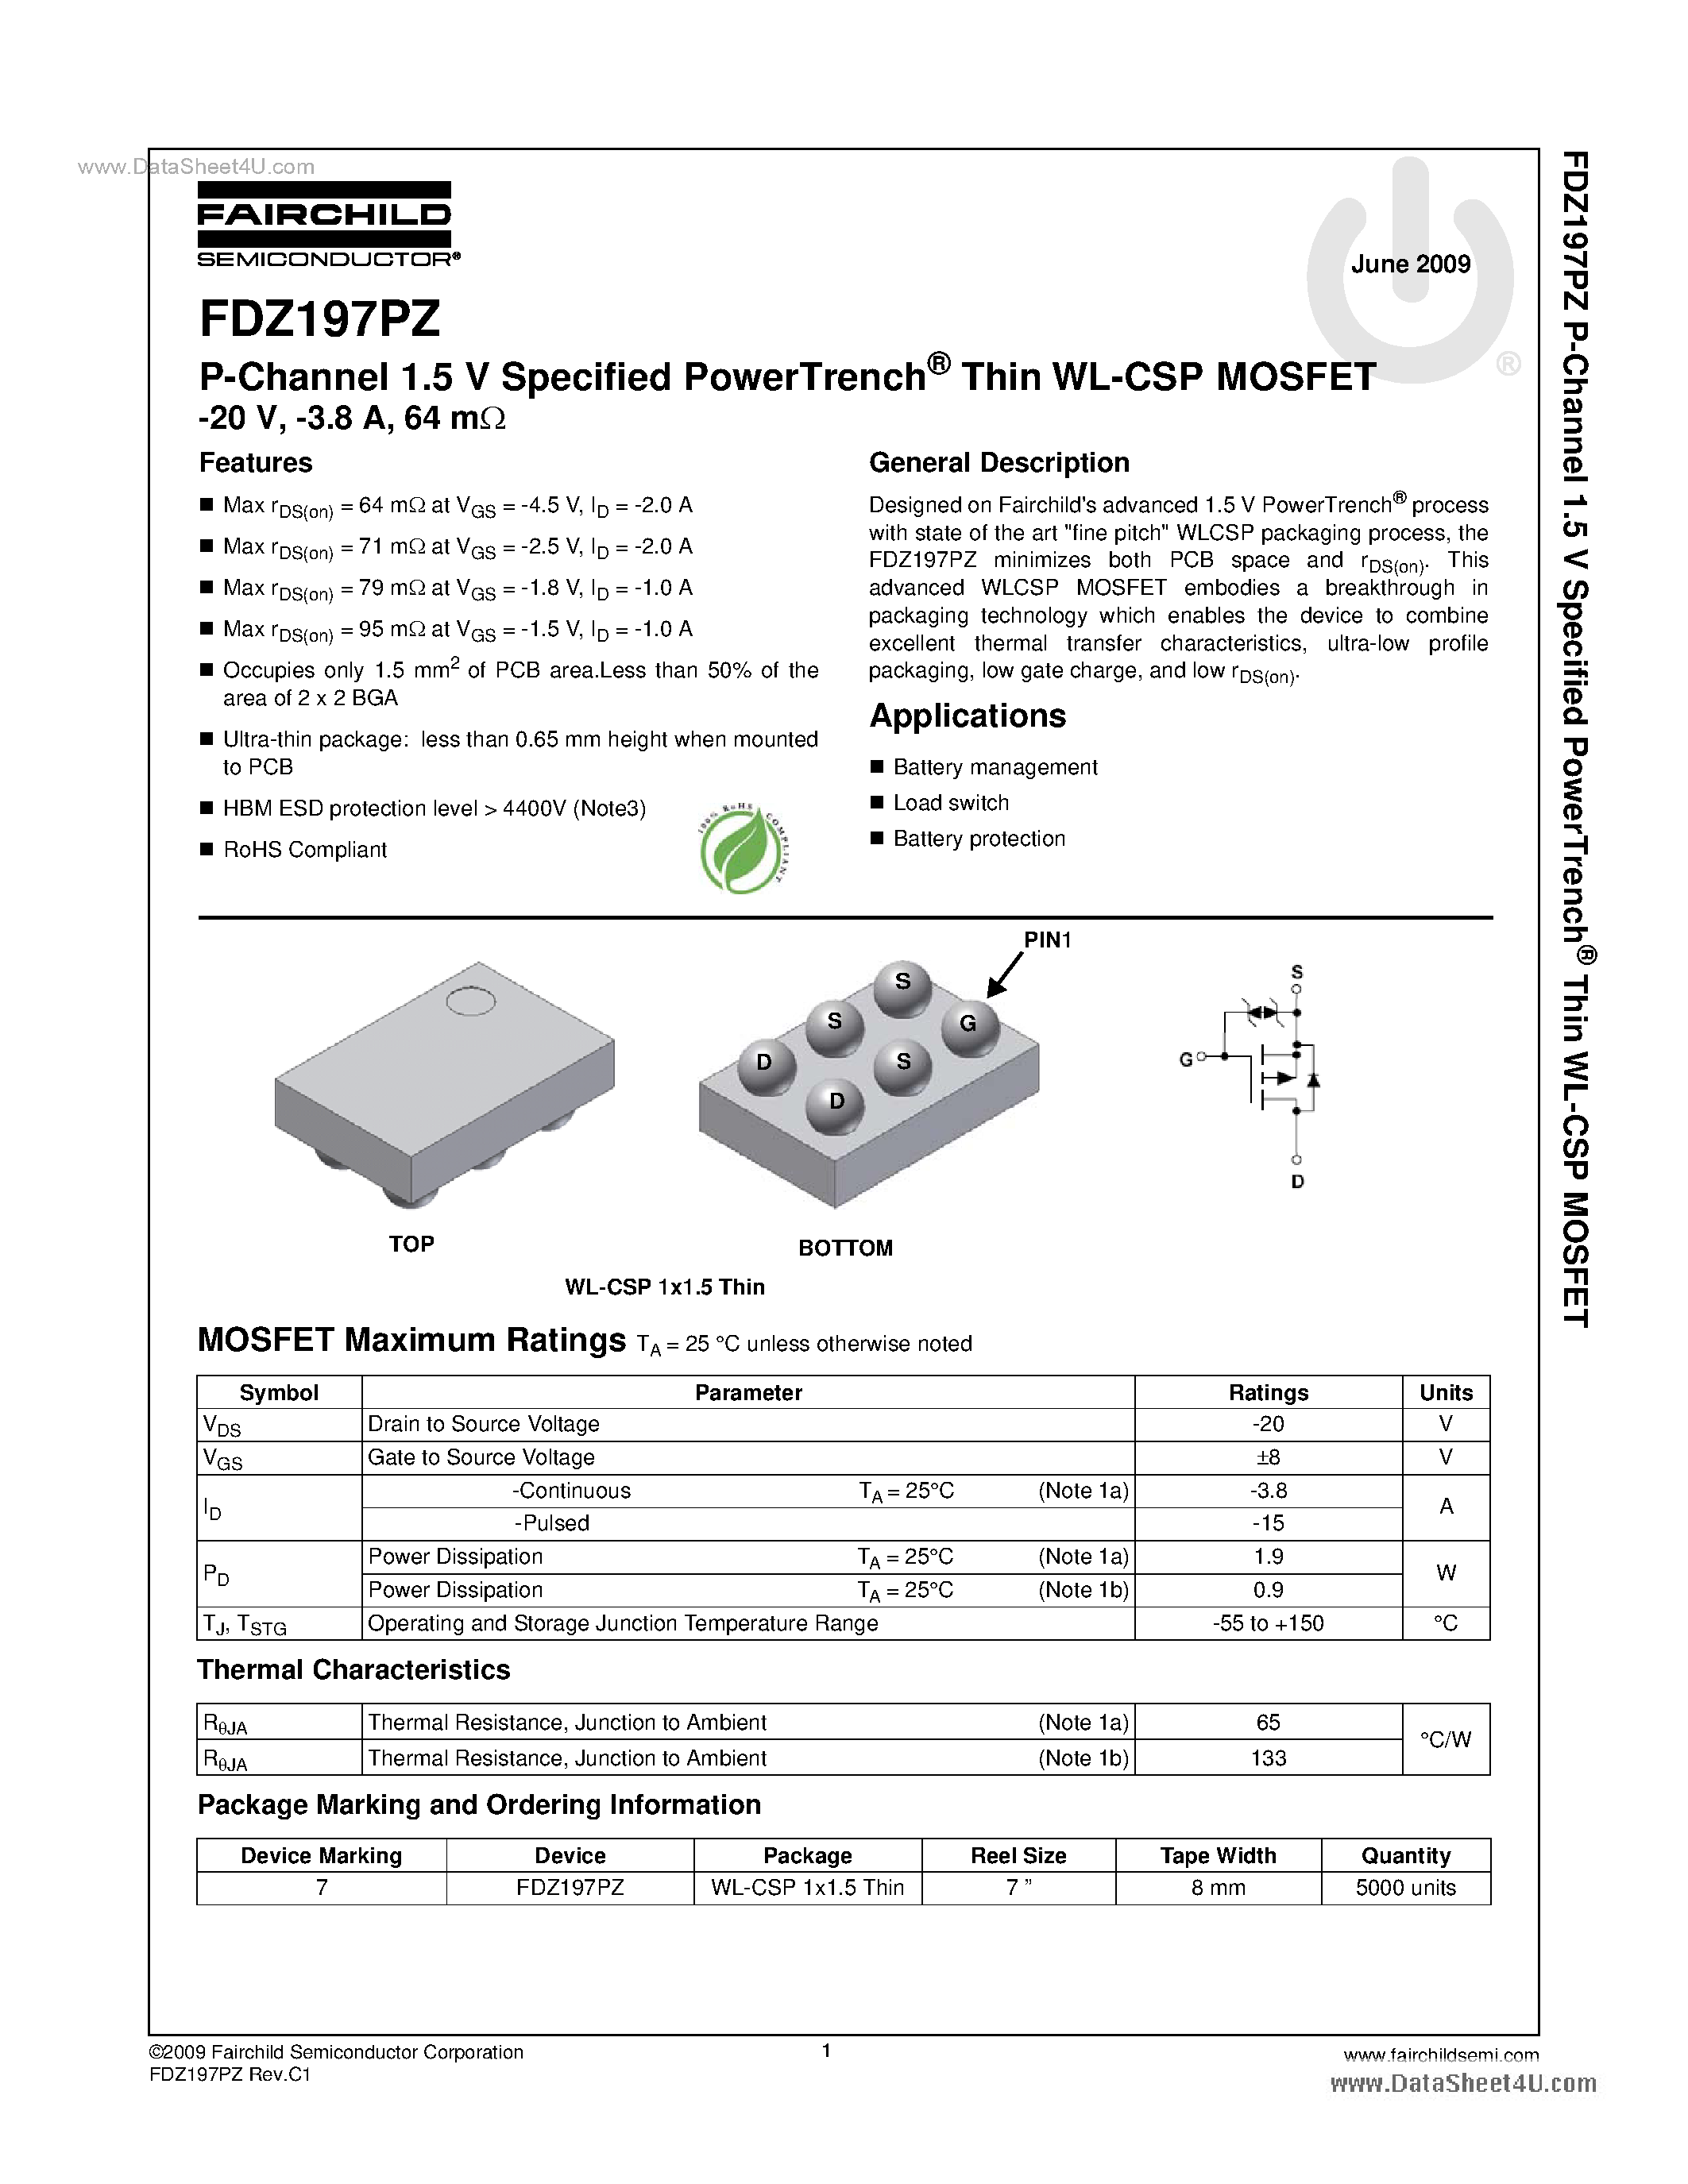 Datasheet FDZ197PZ - -20V P-Channel 1.5V Specified PowerTrench Thin WL-CSP MOSFET page 1